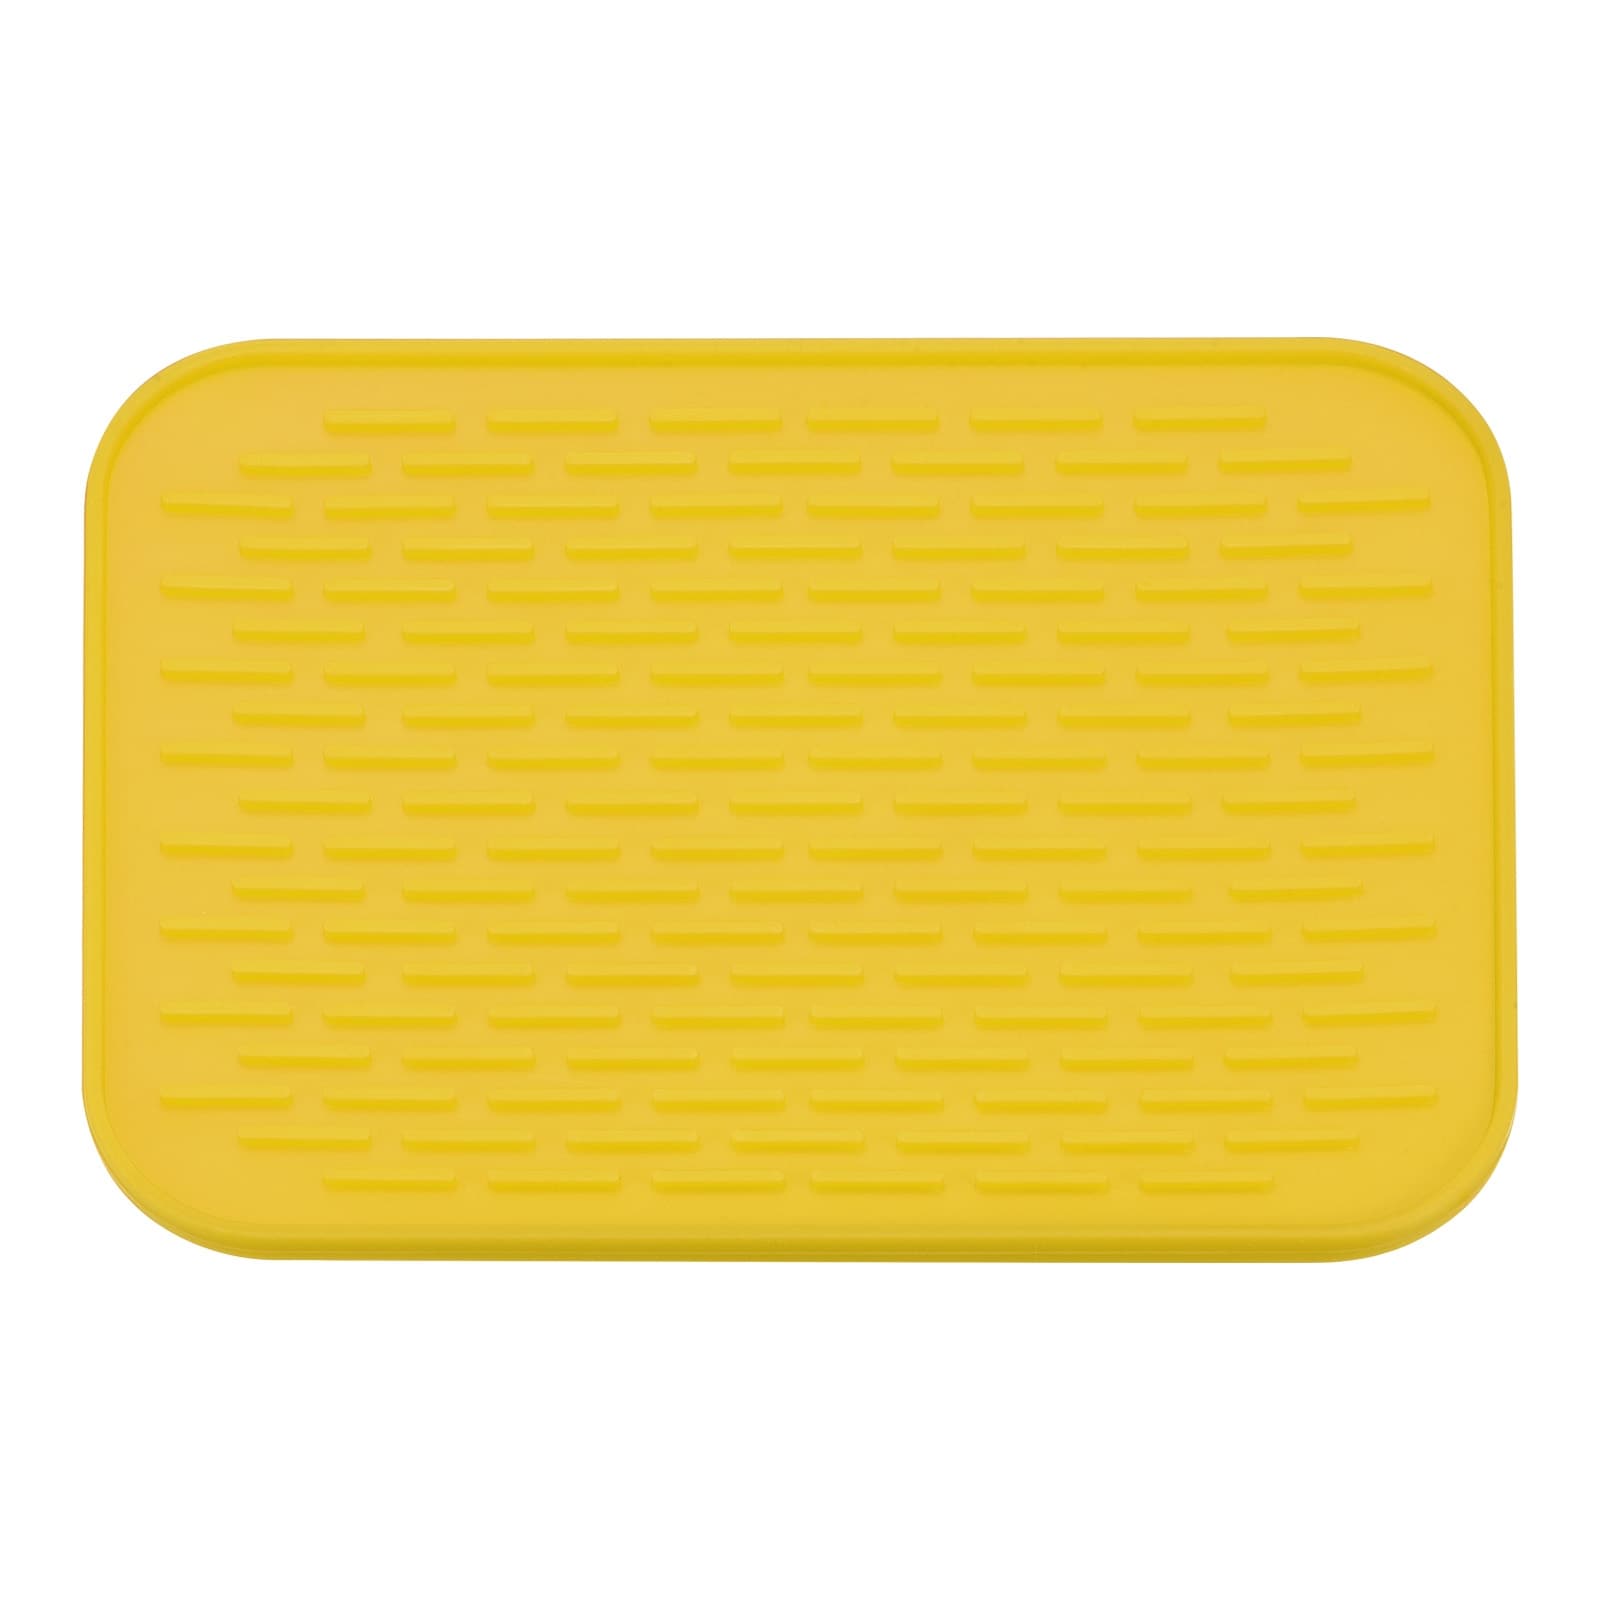 https://ak1.ostkcdn.com/images/products/is/images/direct/f337fe023b9b887eab5497c08b3feed92c154e35/Silicone-Dish-Drying-Mat%2C-Under-Sink-Drain-Pad-for-Kitchen-Counter.jpg